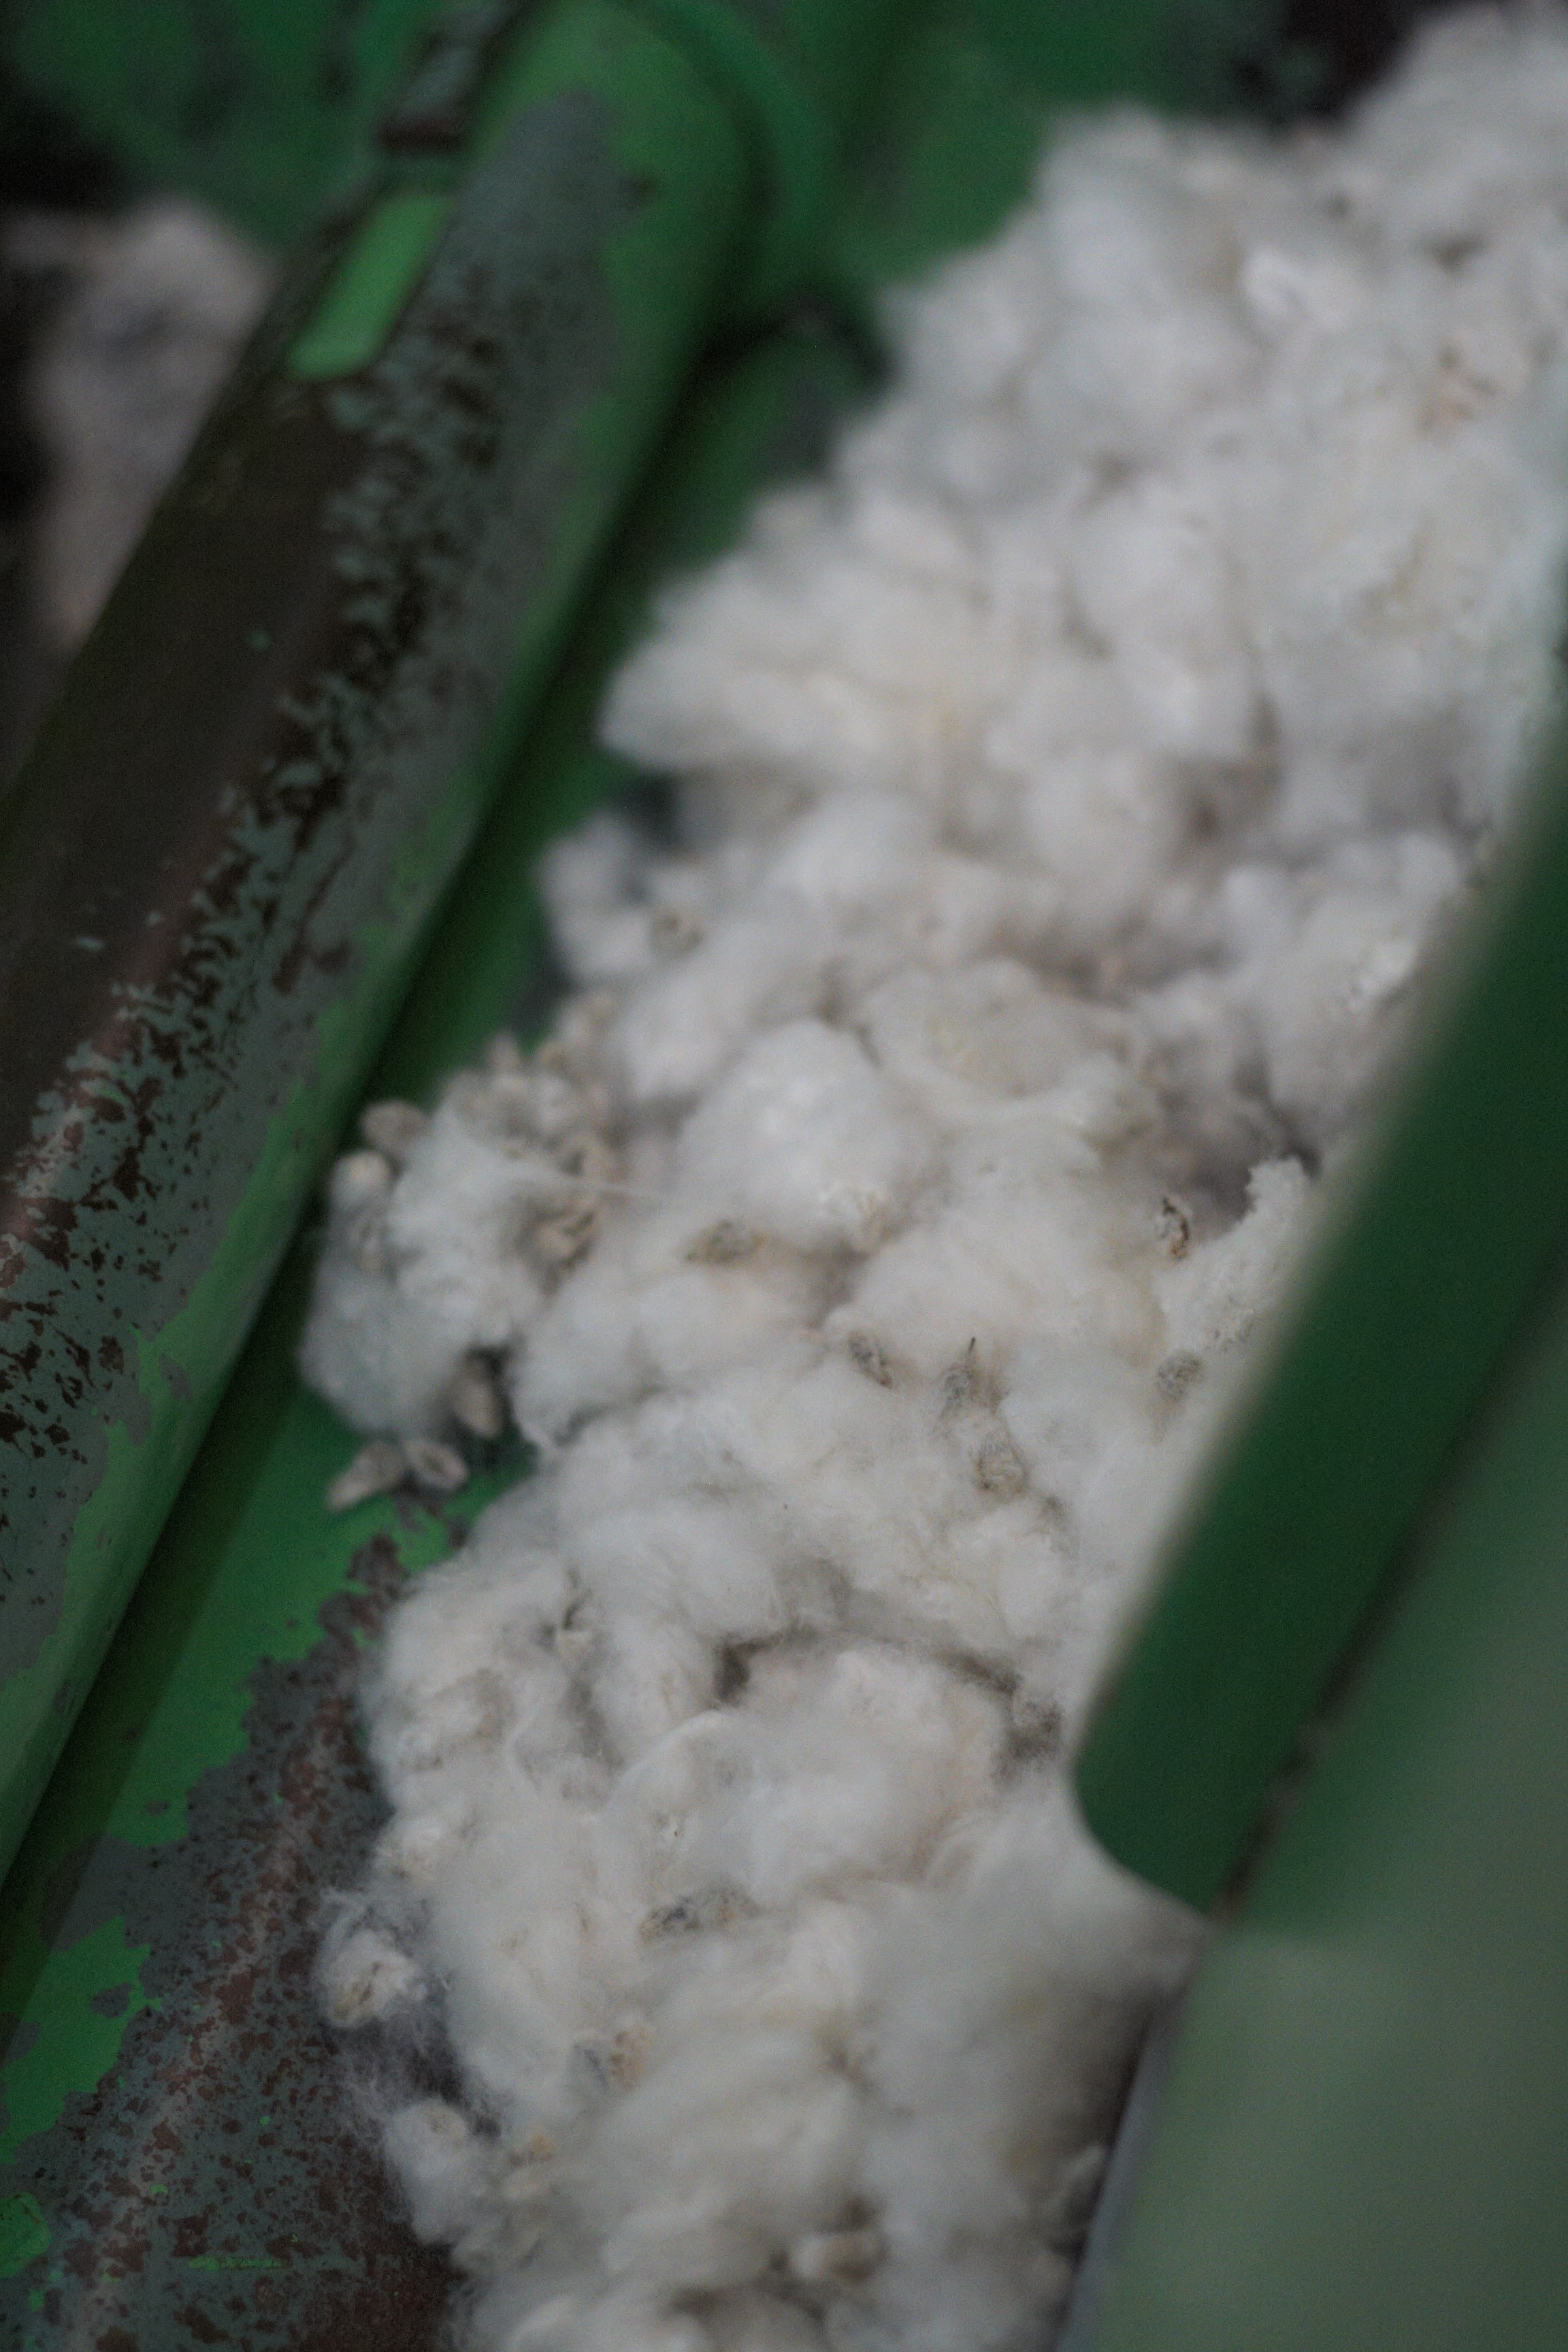 Cotton bolls arrive at the mill